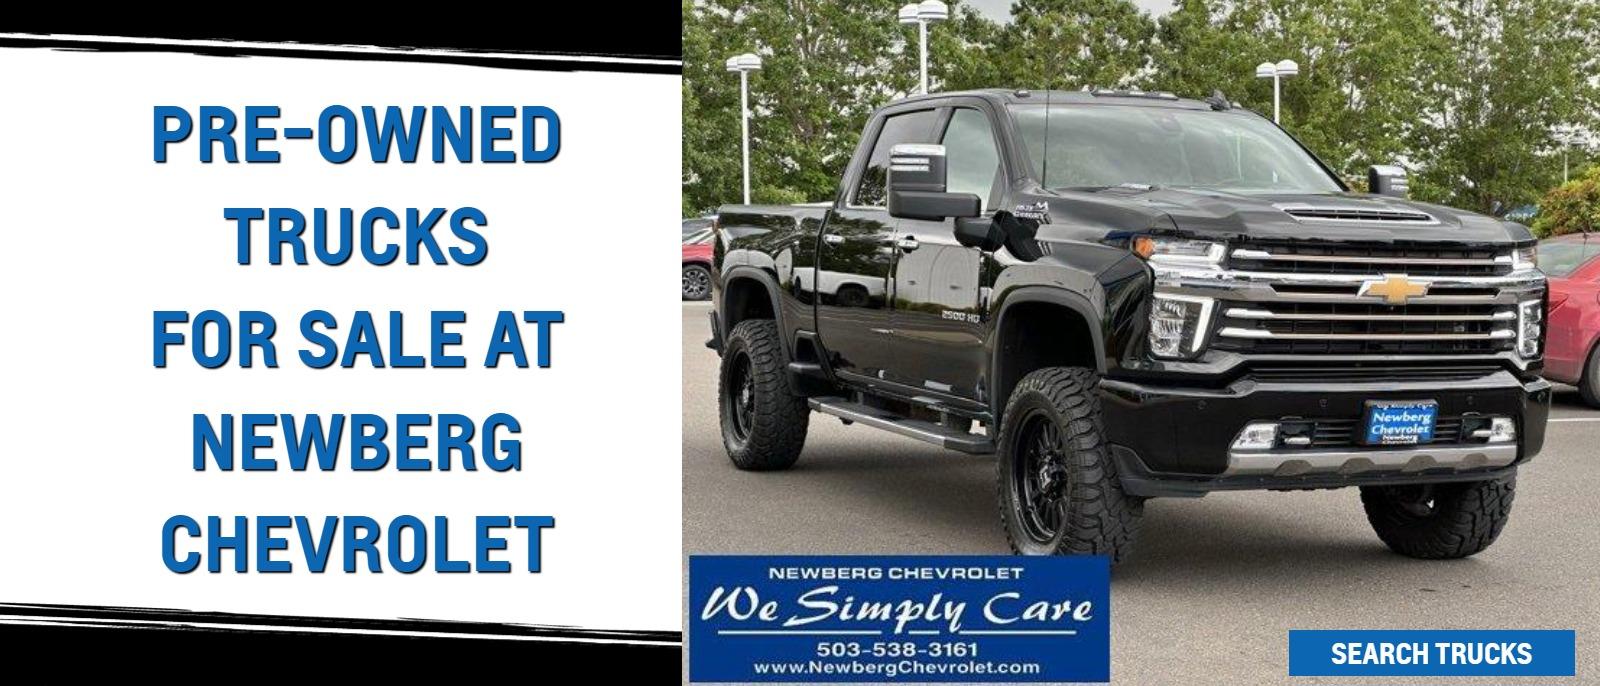 PRE-OWNED TRUCKS FOR SALE AT NEWBERG CHEVY